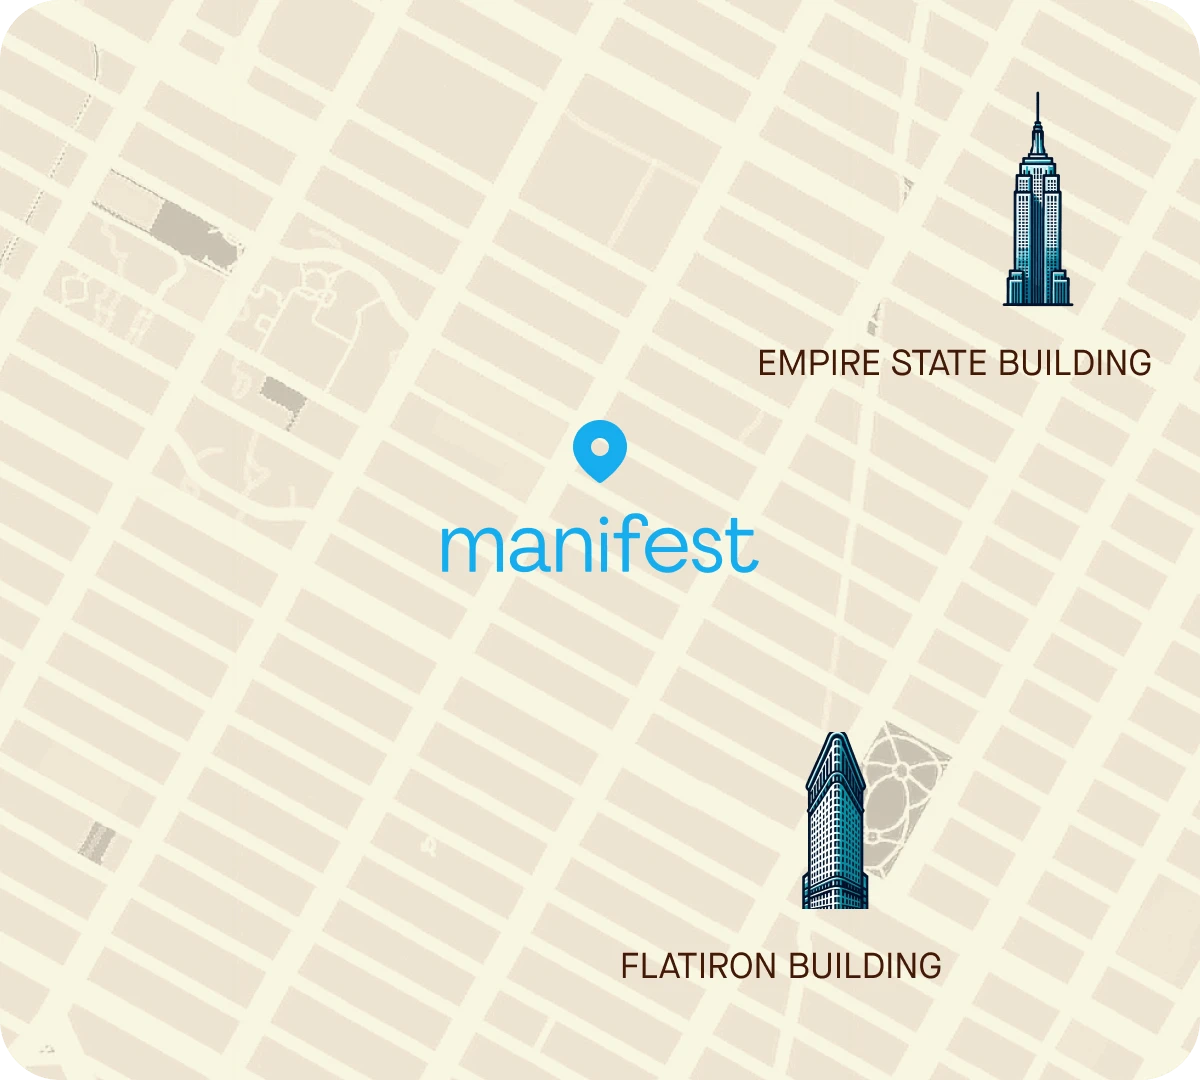 Picture of map depicting Manifest's office location in regards to the Empire state building and the Flatiron building